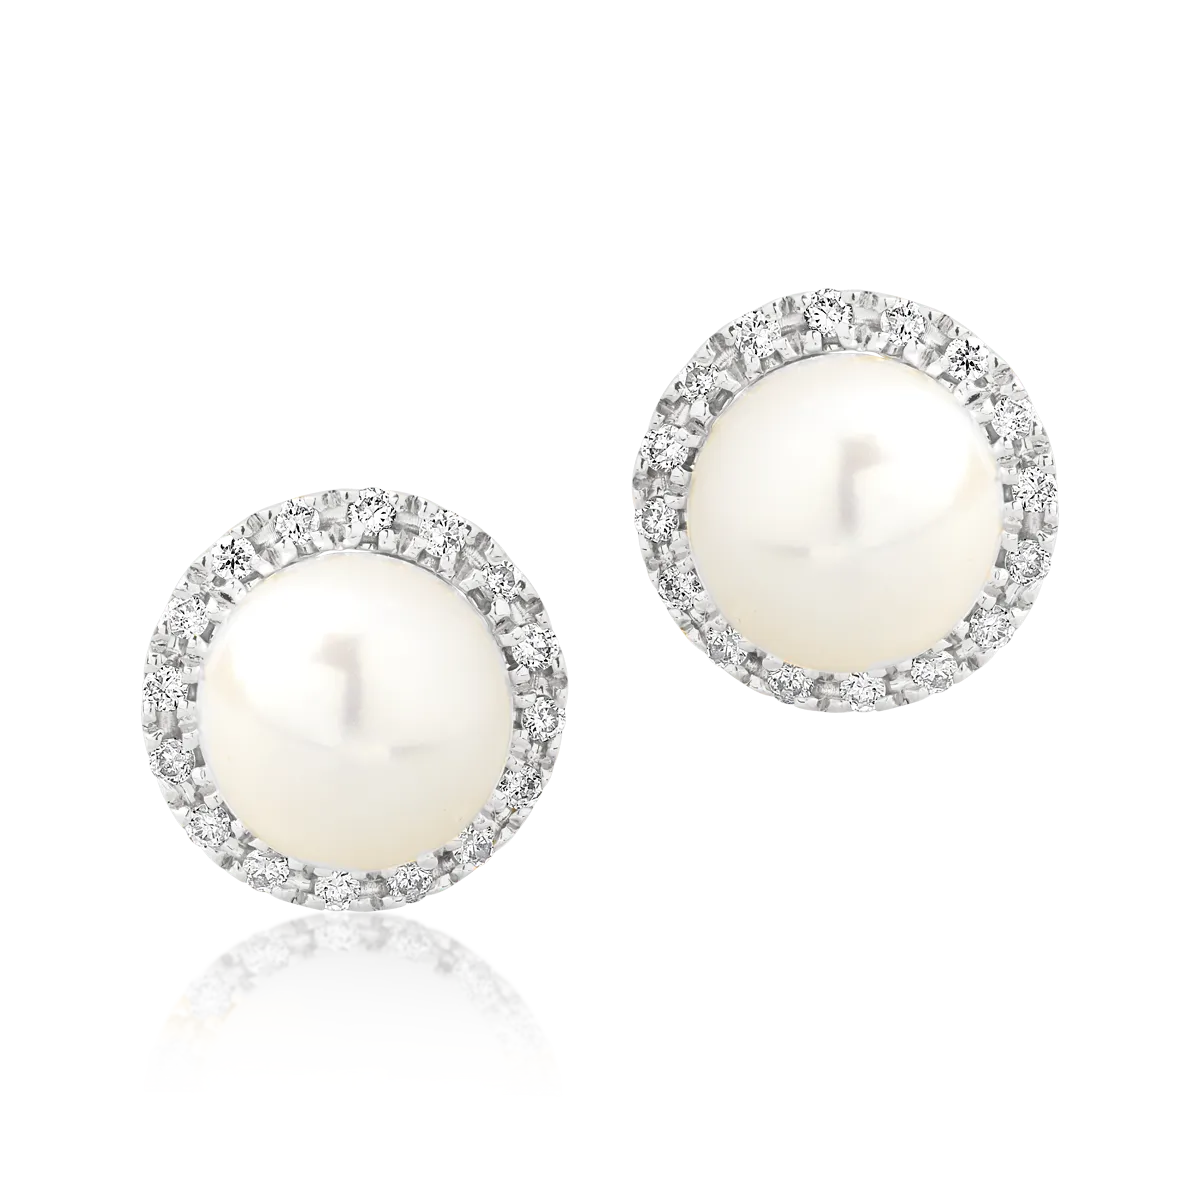 14K white gold earrings with 4.16ct fresh water pearls and 0.12ct diamonds